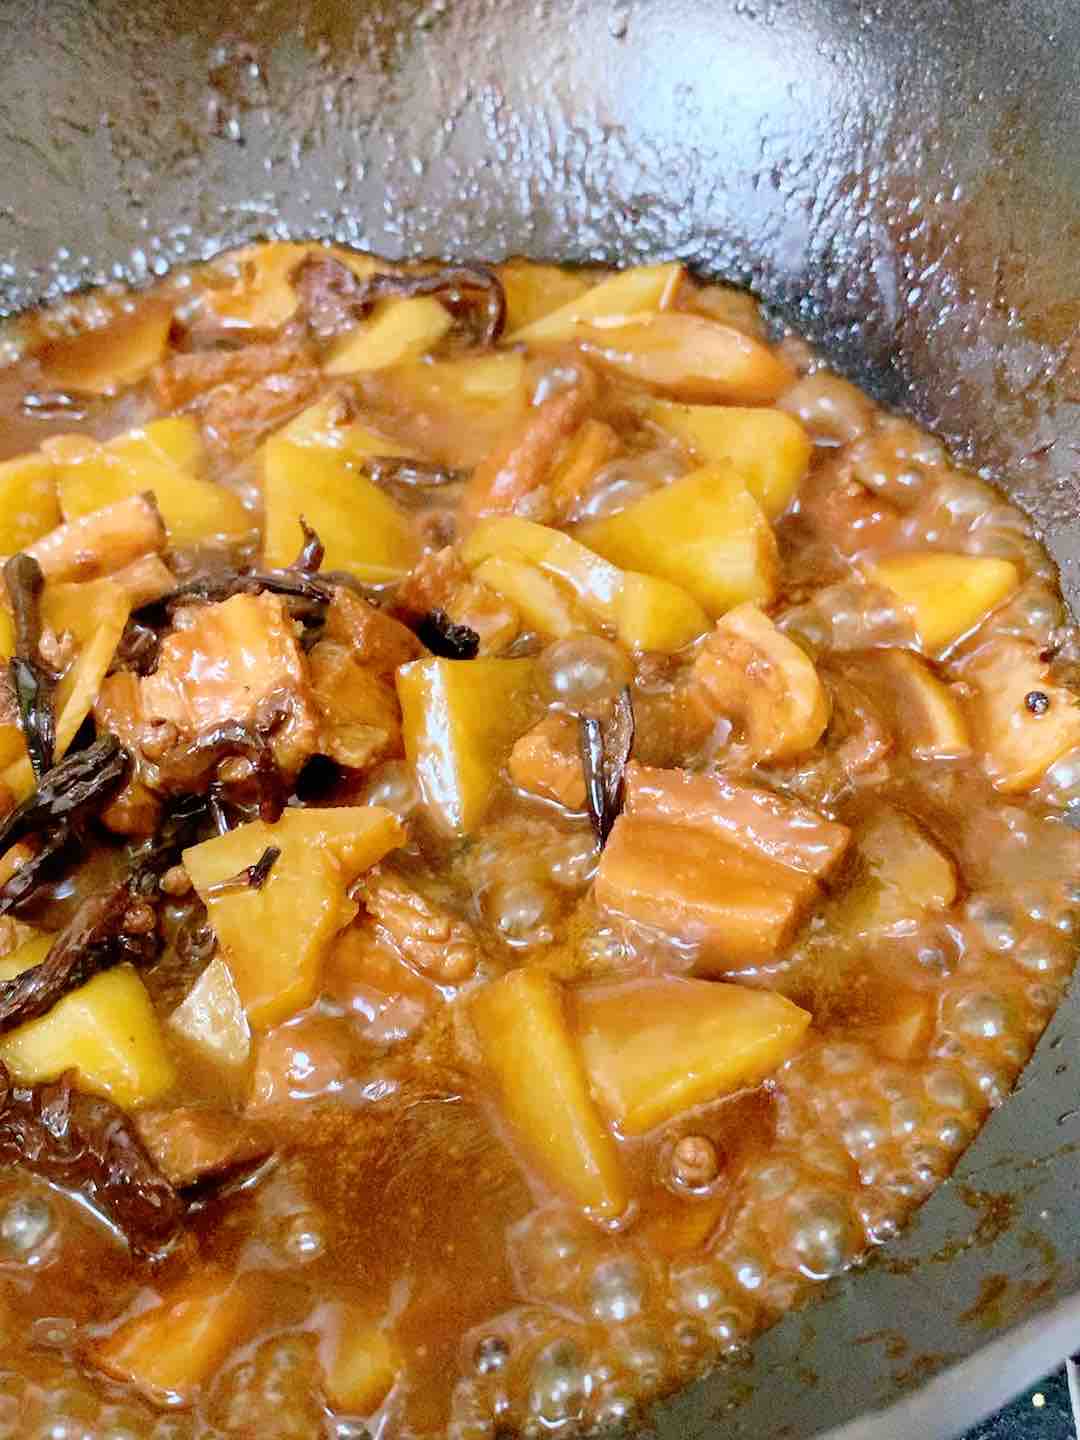 Don't Need to Fry Sugar-colored Homemade Braised Pork recipe